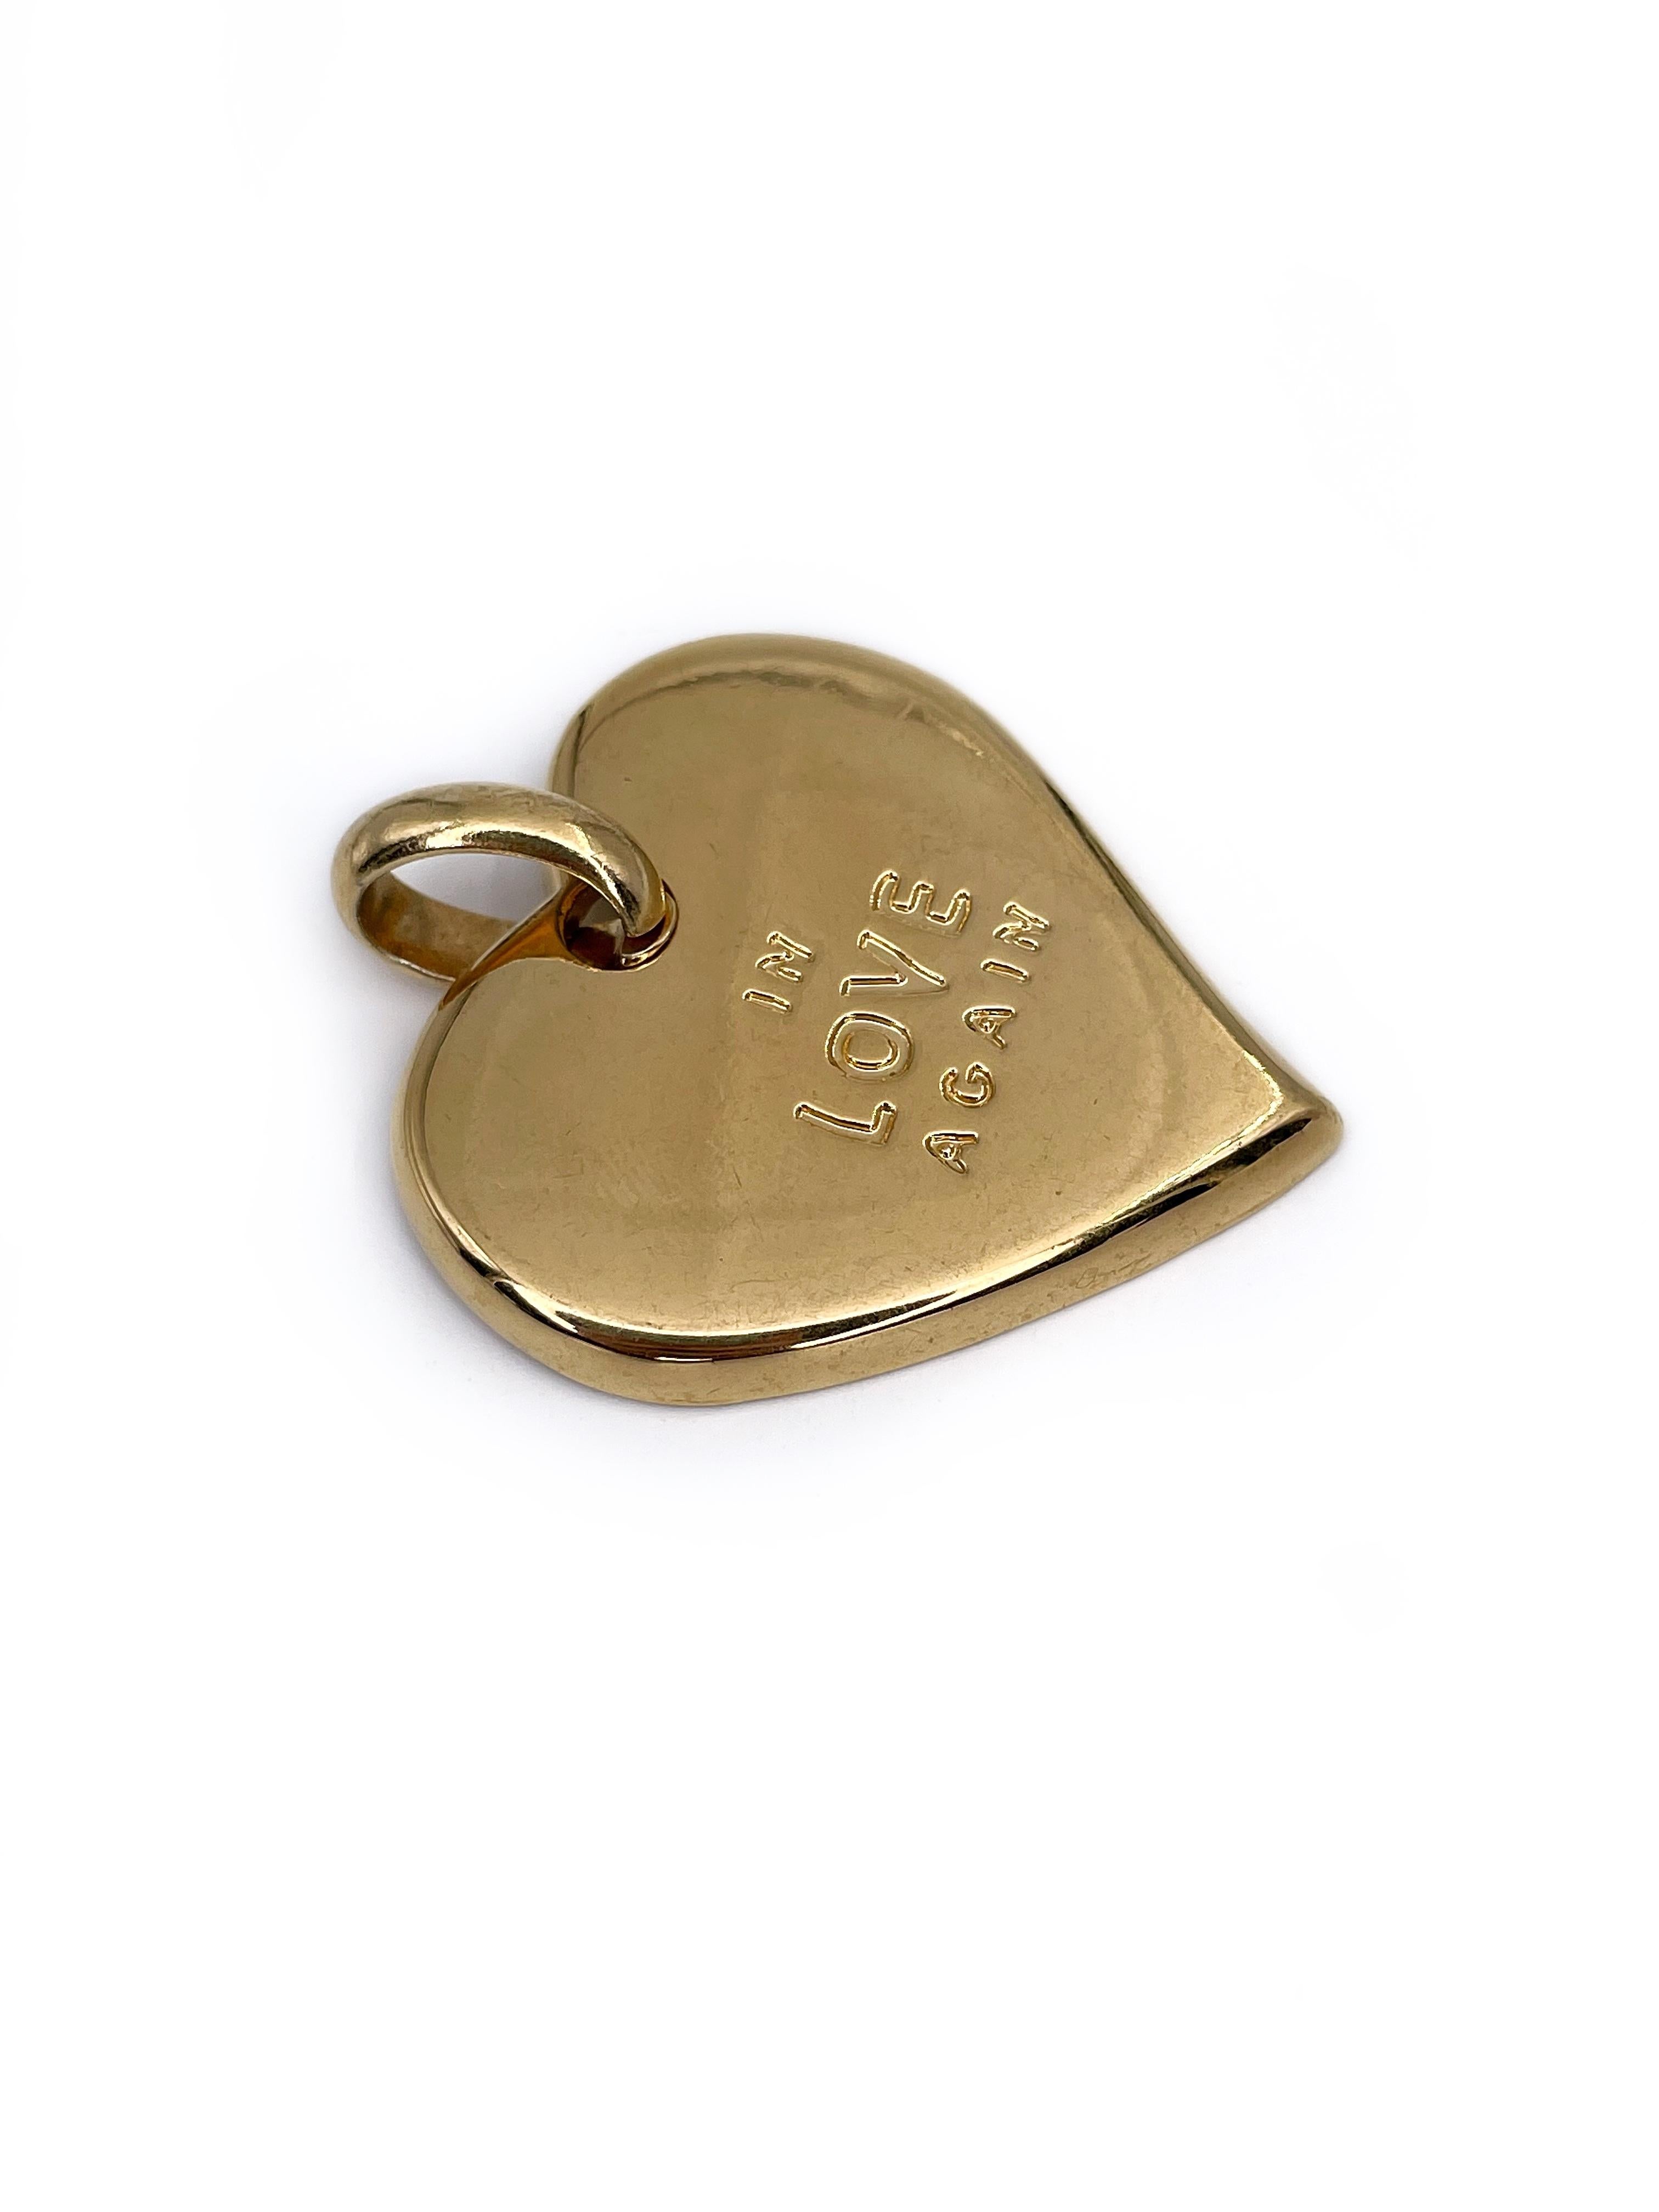 This is a gold tone heart pendant designed by YSL in 1990’s. The piece is gold plated. 

Has some minor scratches on the surface. 

Signed: “YSL - Made in France” (shown in photos).

Size: 4.5x3.7cm

———

If you have any questions, please feel free